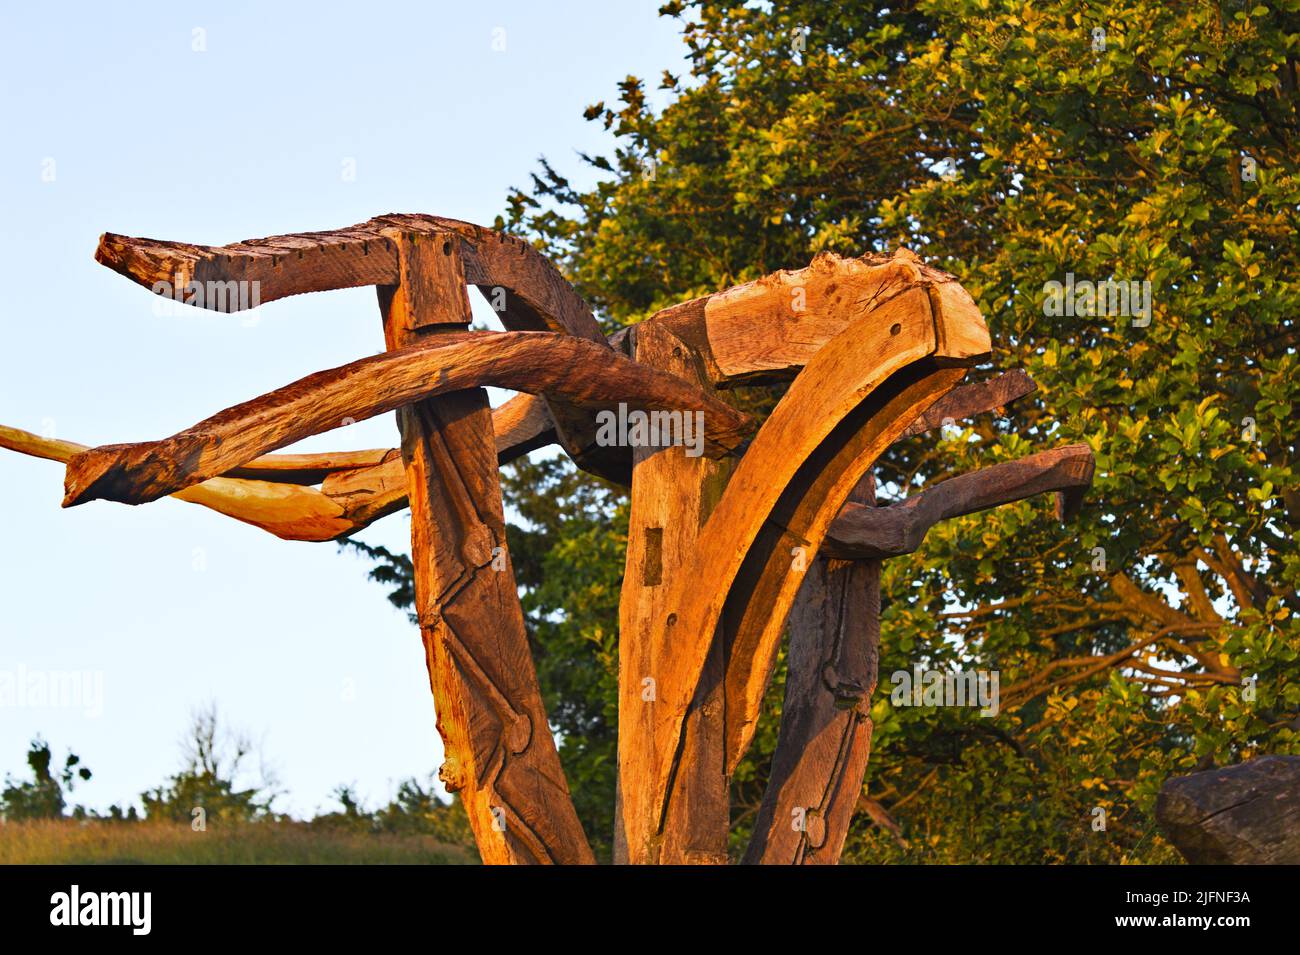 wooden red kite sculpture Stock Photo